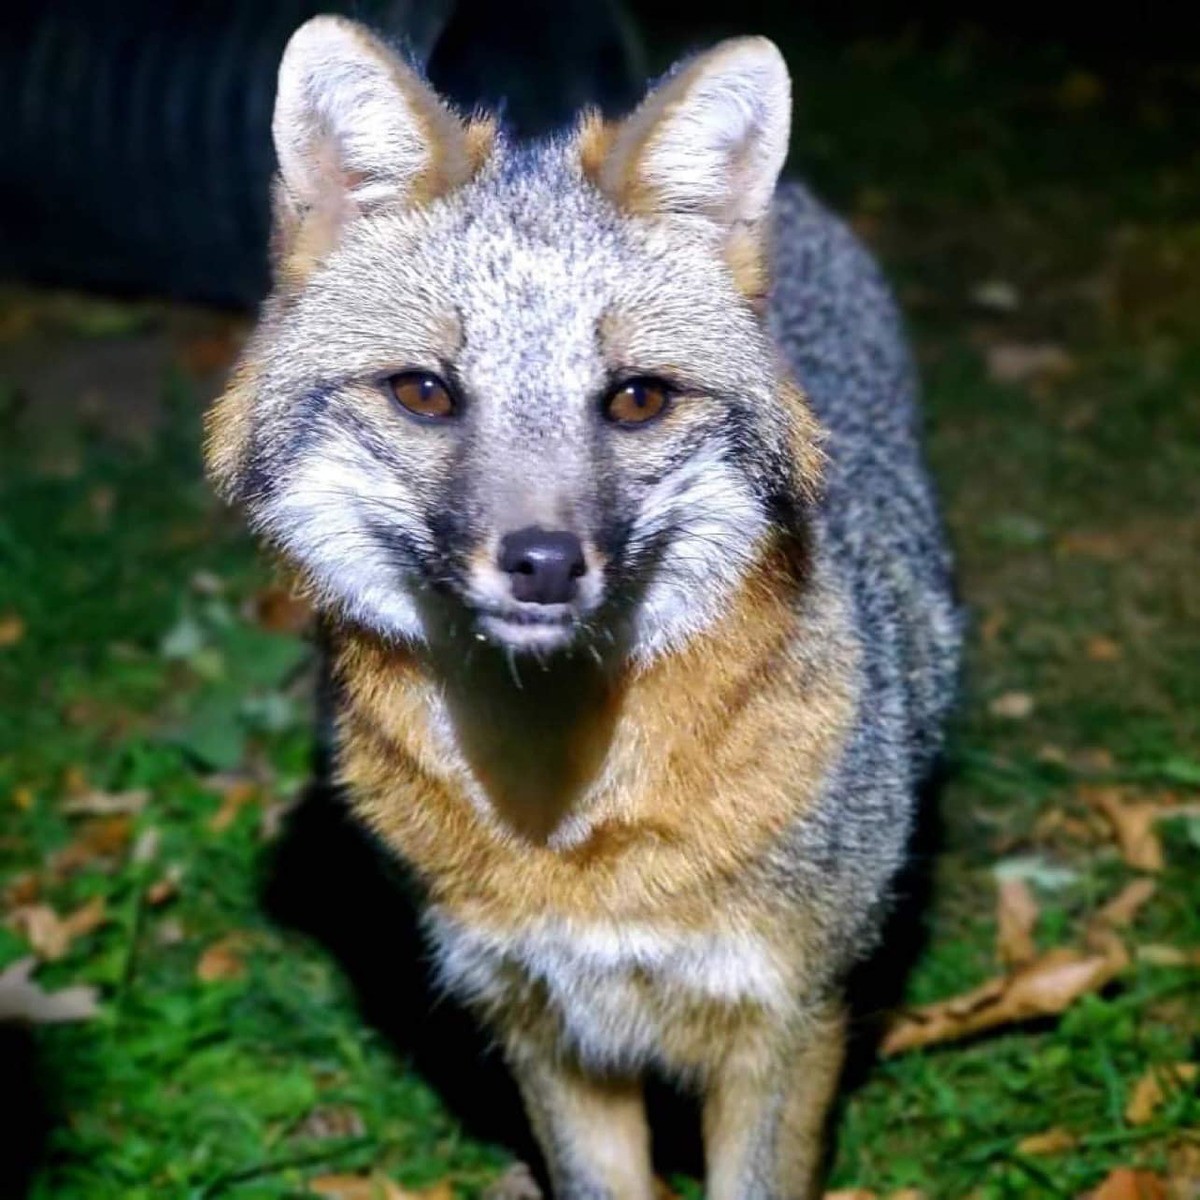 Nikita. join list: RescueCritters (53 subs)Mention History Nikita is a gray fox who lives at SaveAFox Rescue. Unlike the red fox which is most active at dusk an